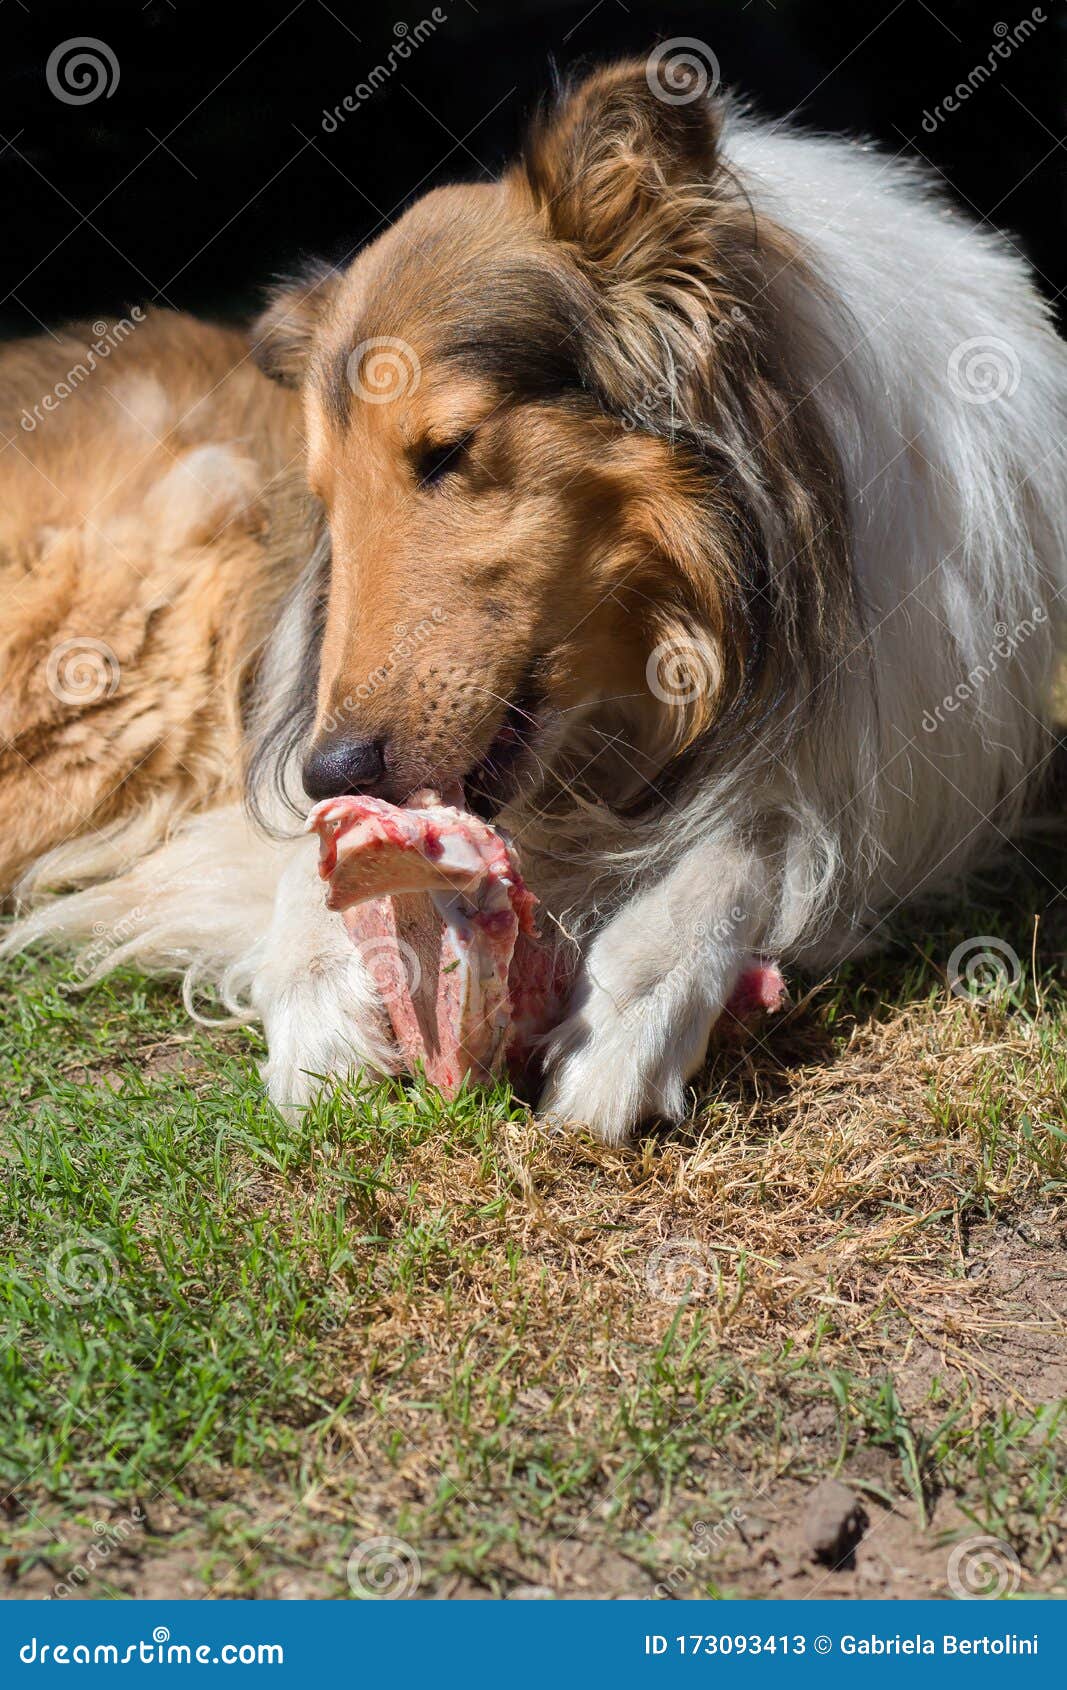 at donere lampe Bug Portrait of Golden Collie Dog with a Bone with Raw Meat Carrying Barf Diet  Stock Image - Image of meat, domestic: 173093413